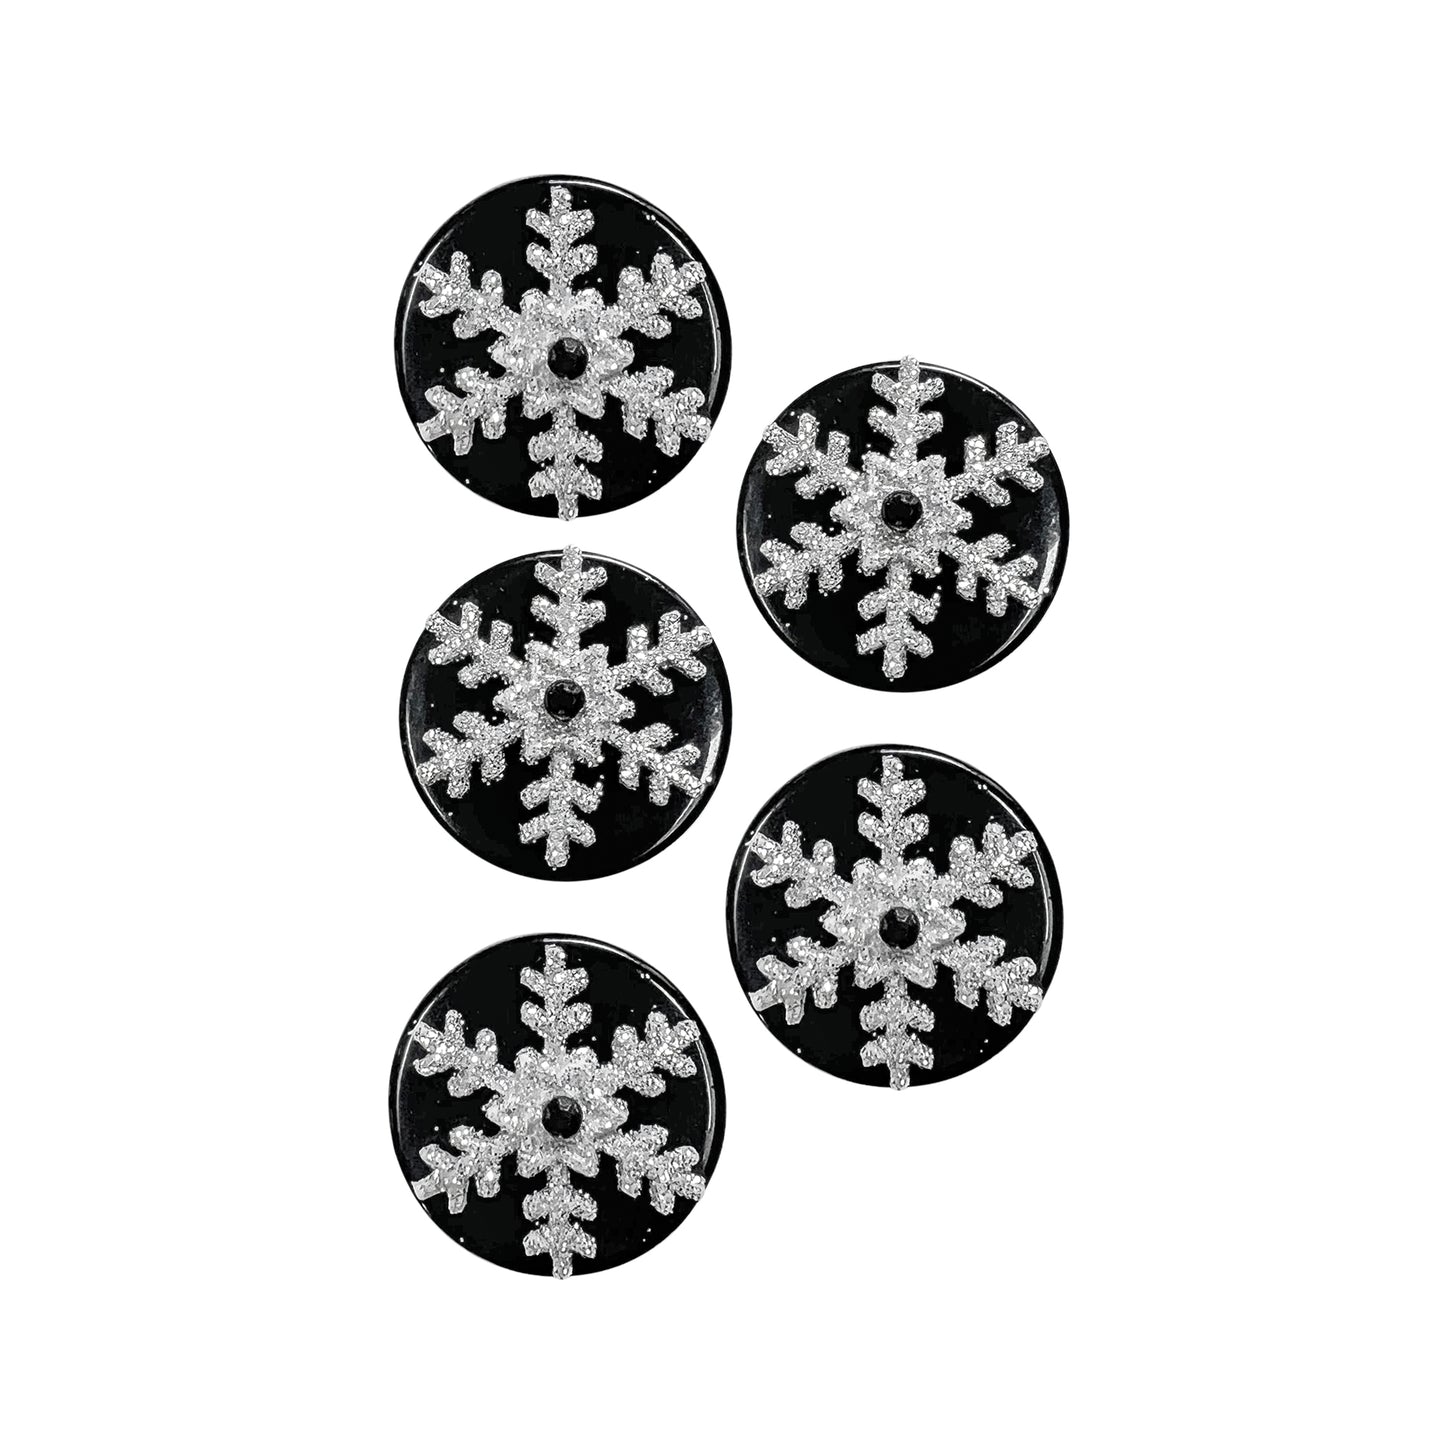 Set of 5 Medium Glitter Snowflakes embellishments. Black buttons with iridescent snowflakes topped with black rhinestones.